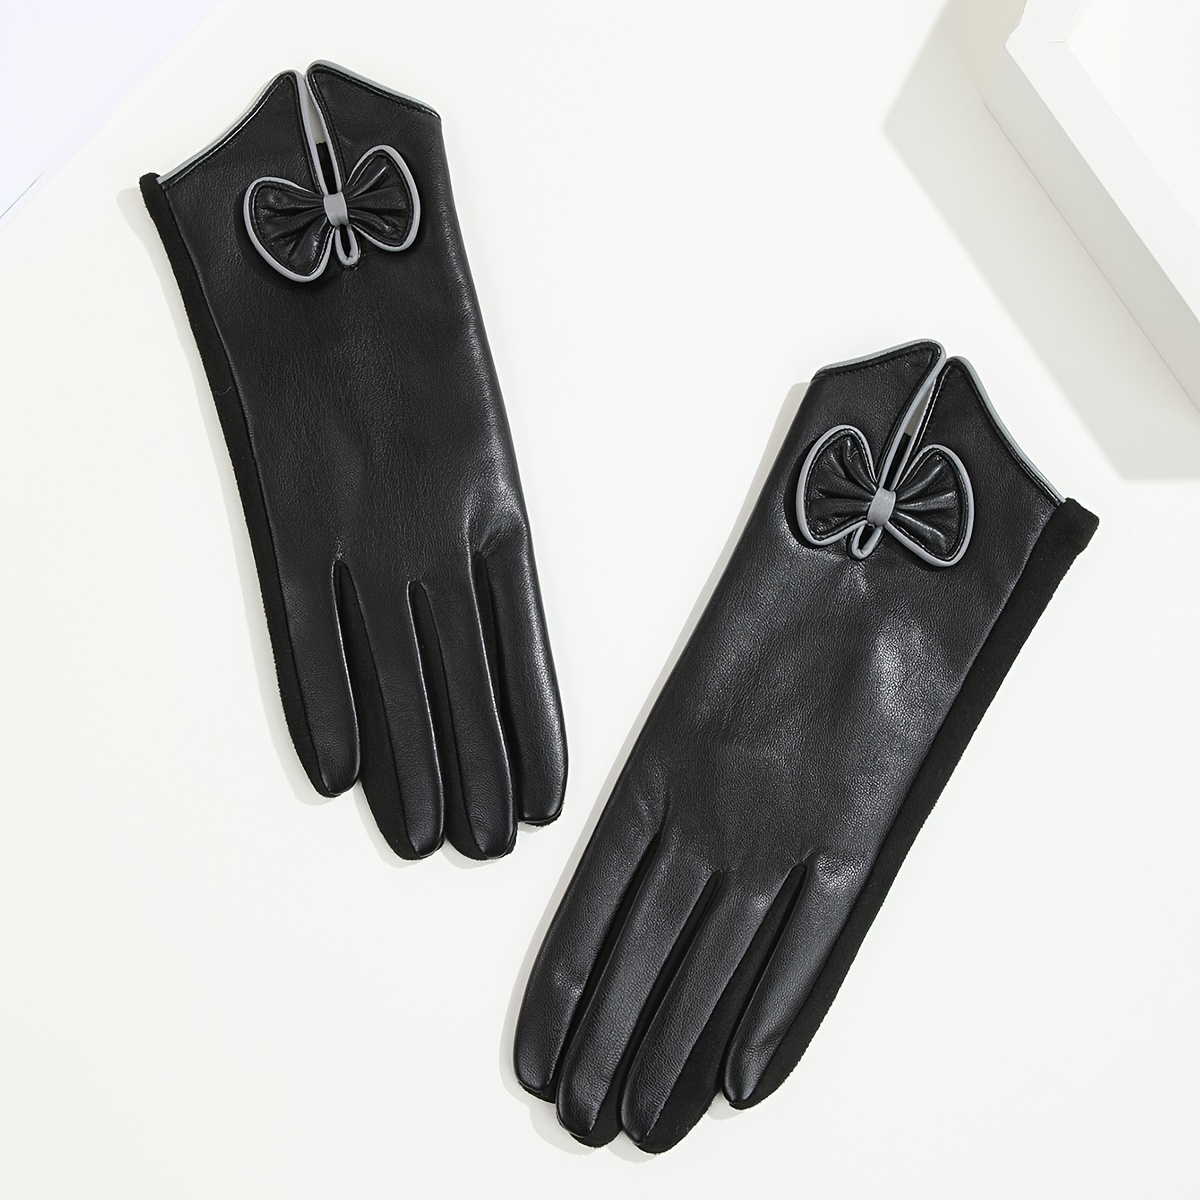 Pu Leather Swallowtail Gloves Black Womens Driving Gloves Vintage